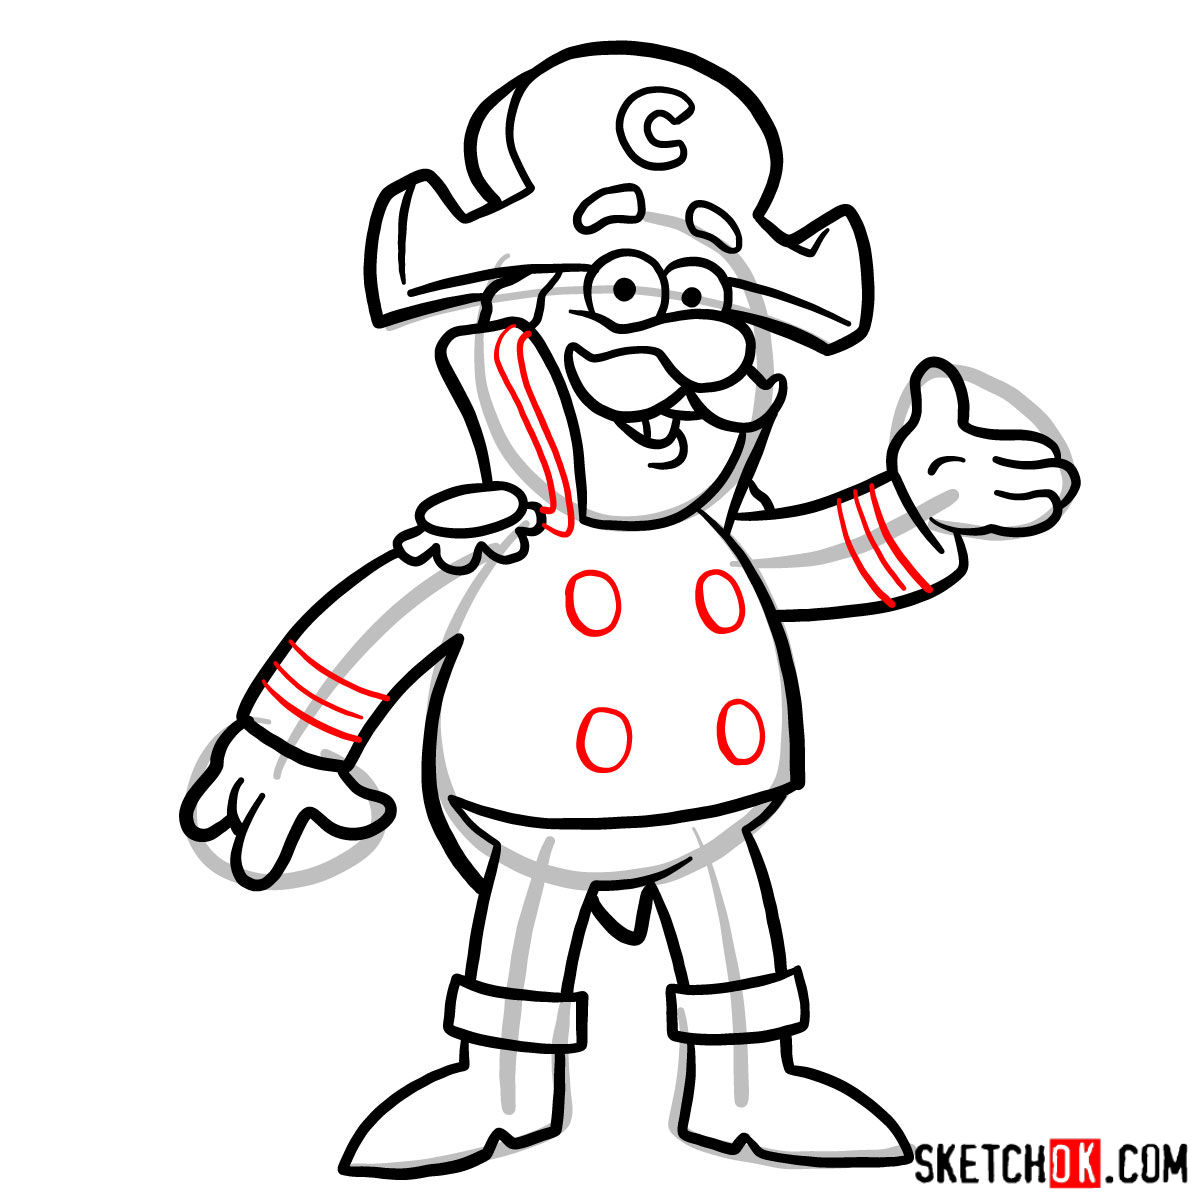 How to draw Cap'n Crunch - step 11